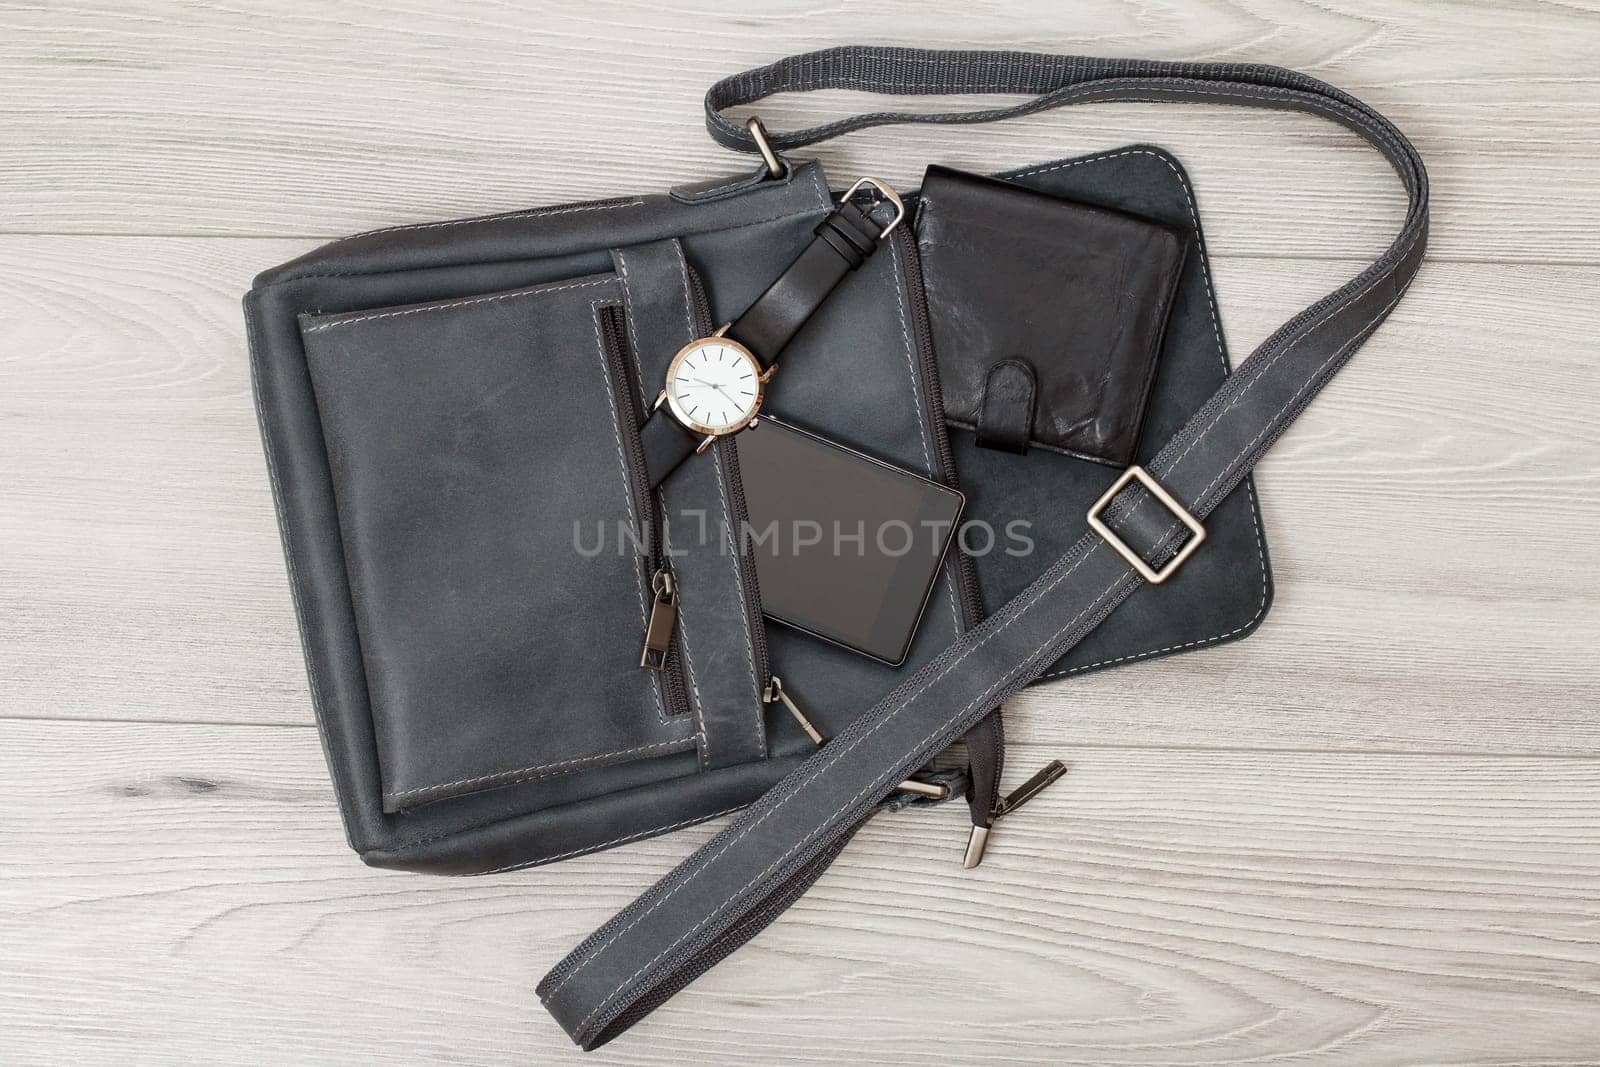 Leather shoulder bag for men with mobile phone, watch and wallet on it with gray wooden background. Men's accessories. Top view.